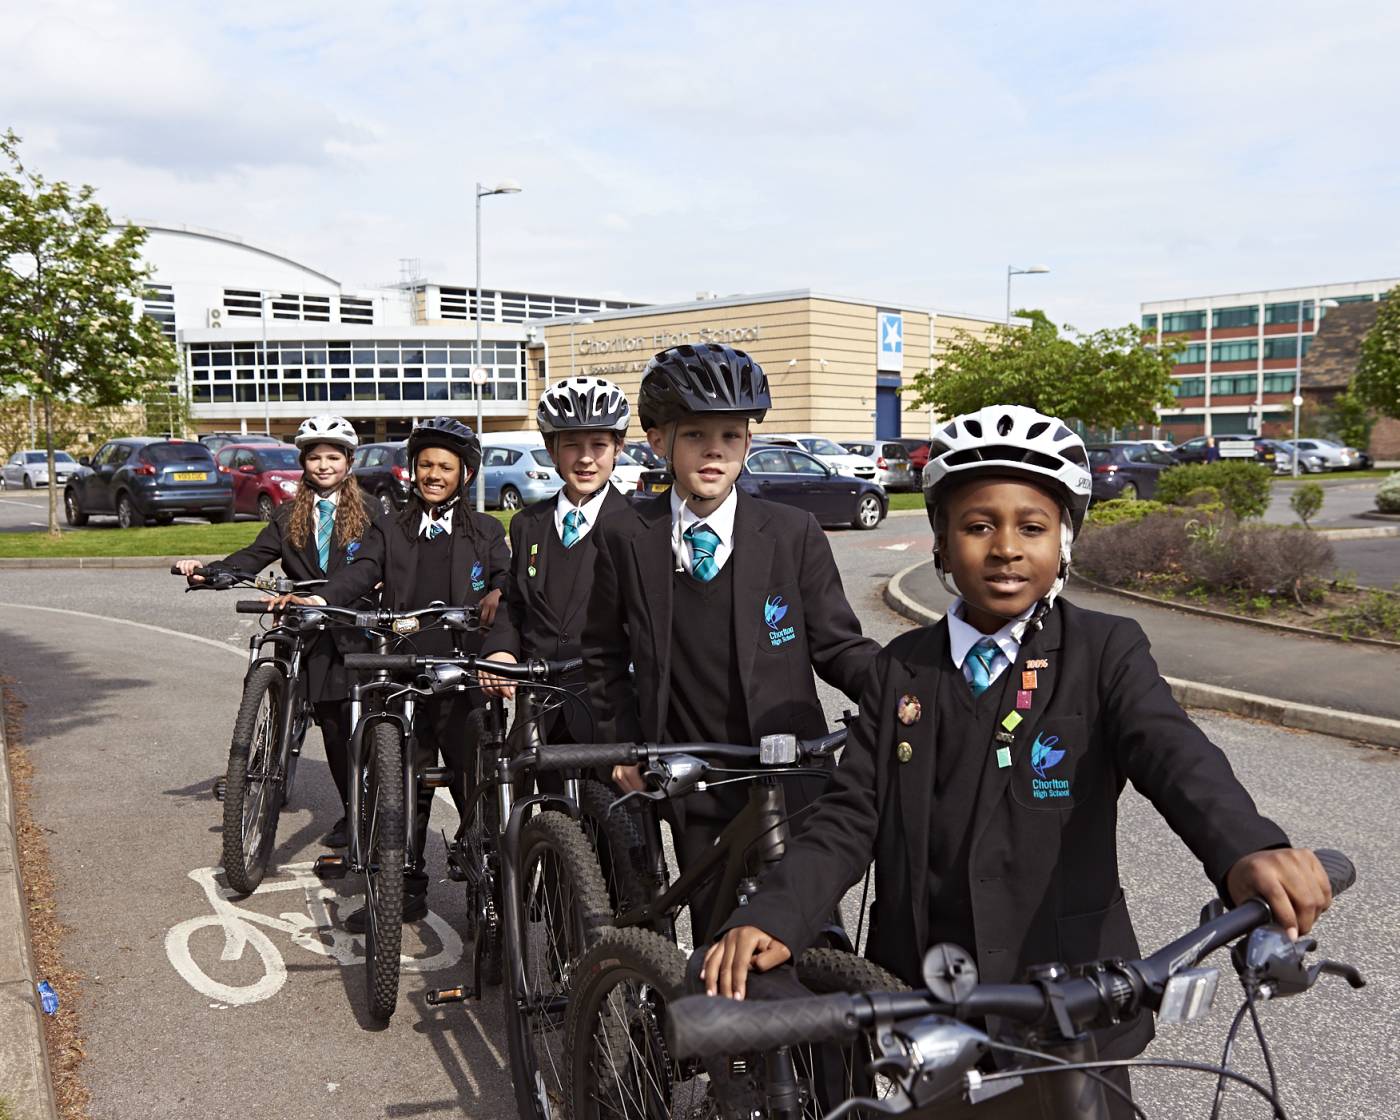 High school students stood next to their bikes on a cycle lane